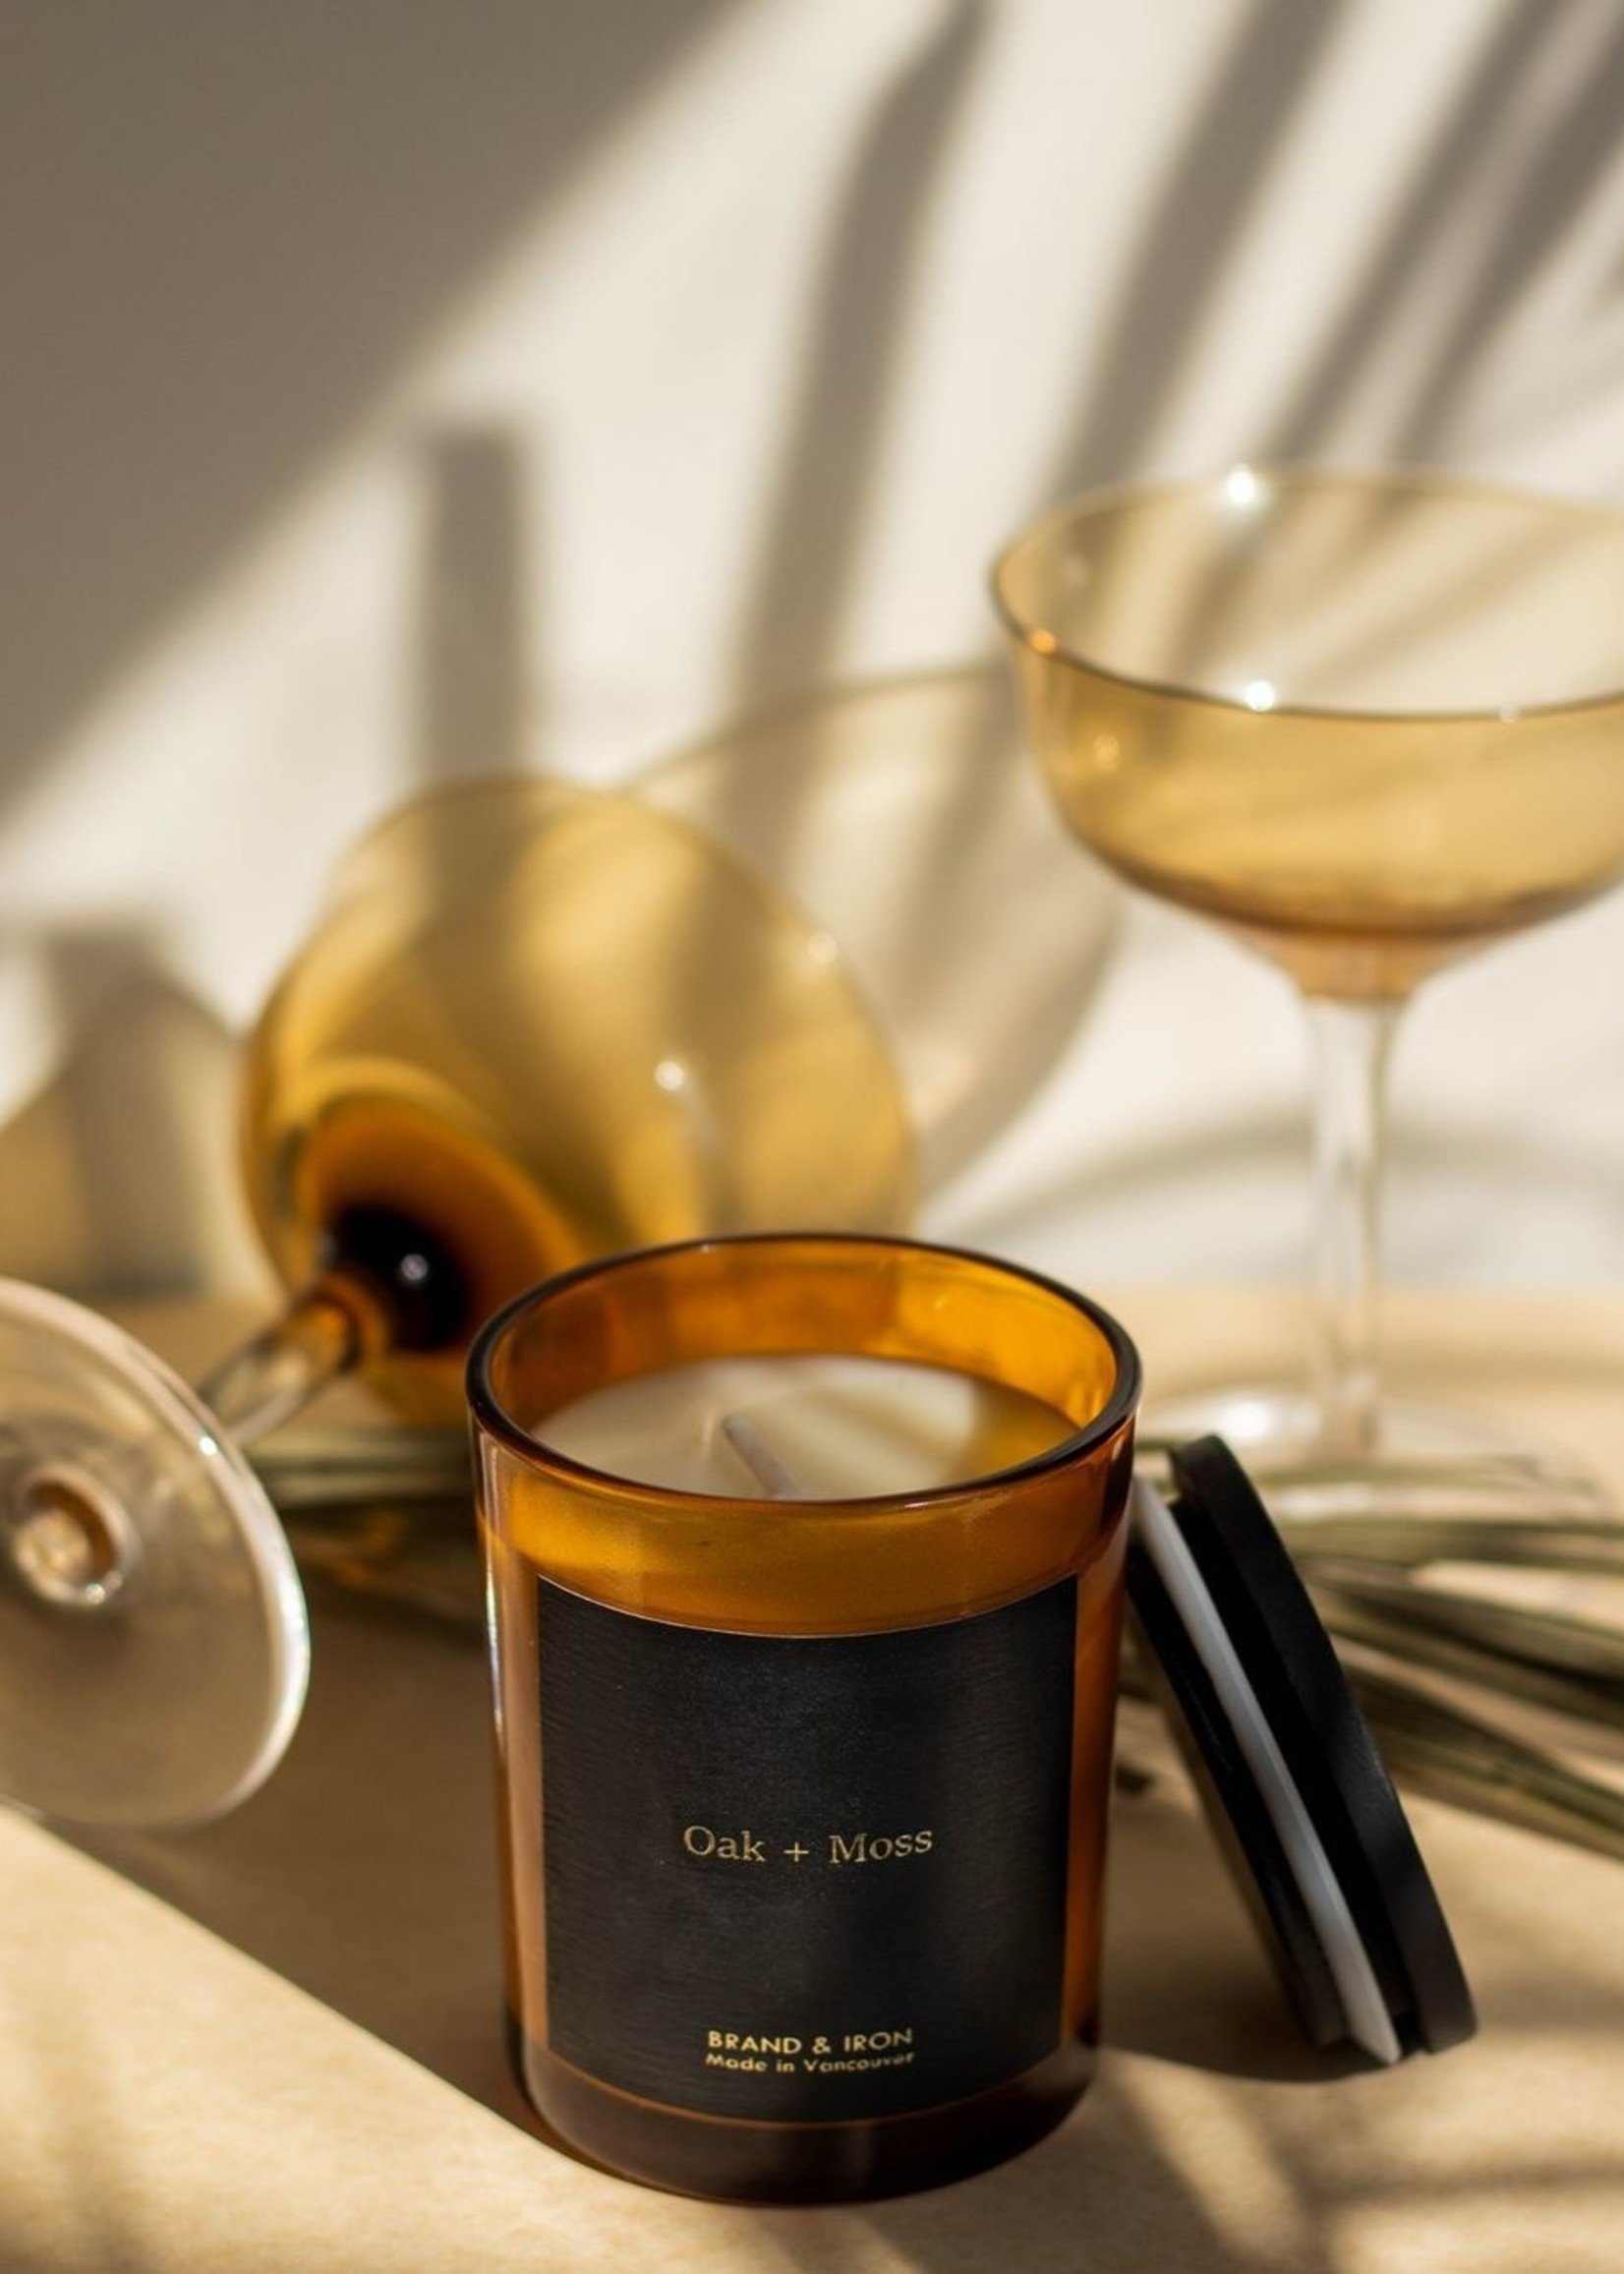 Brand & Iron Oak + Moss Candle Amber Collection